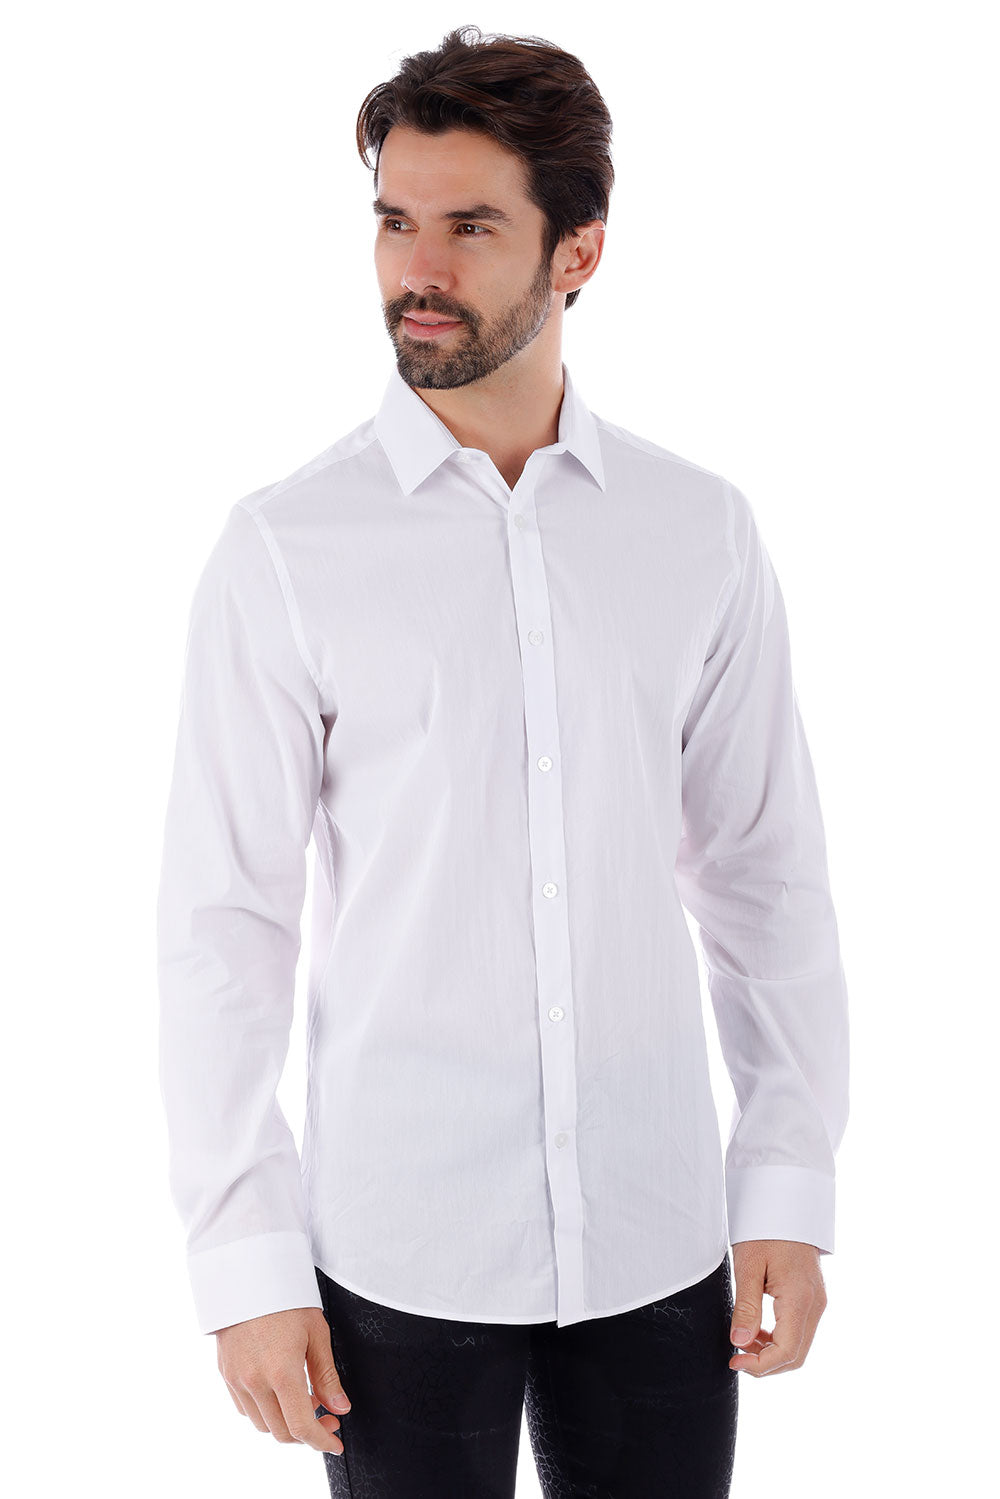 BARABAS Men's Solid Color Button Down Long Sleeve Shirt 4B410 White